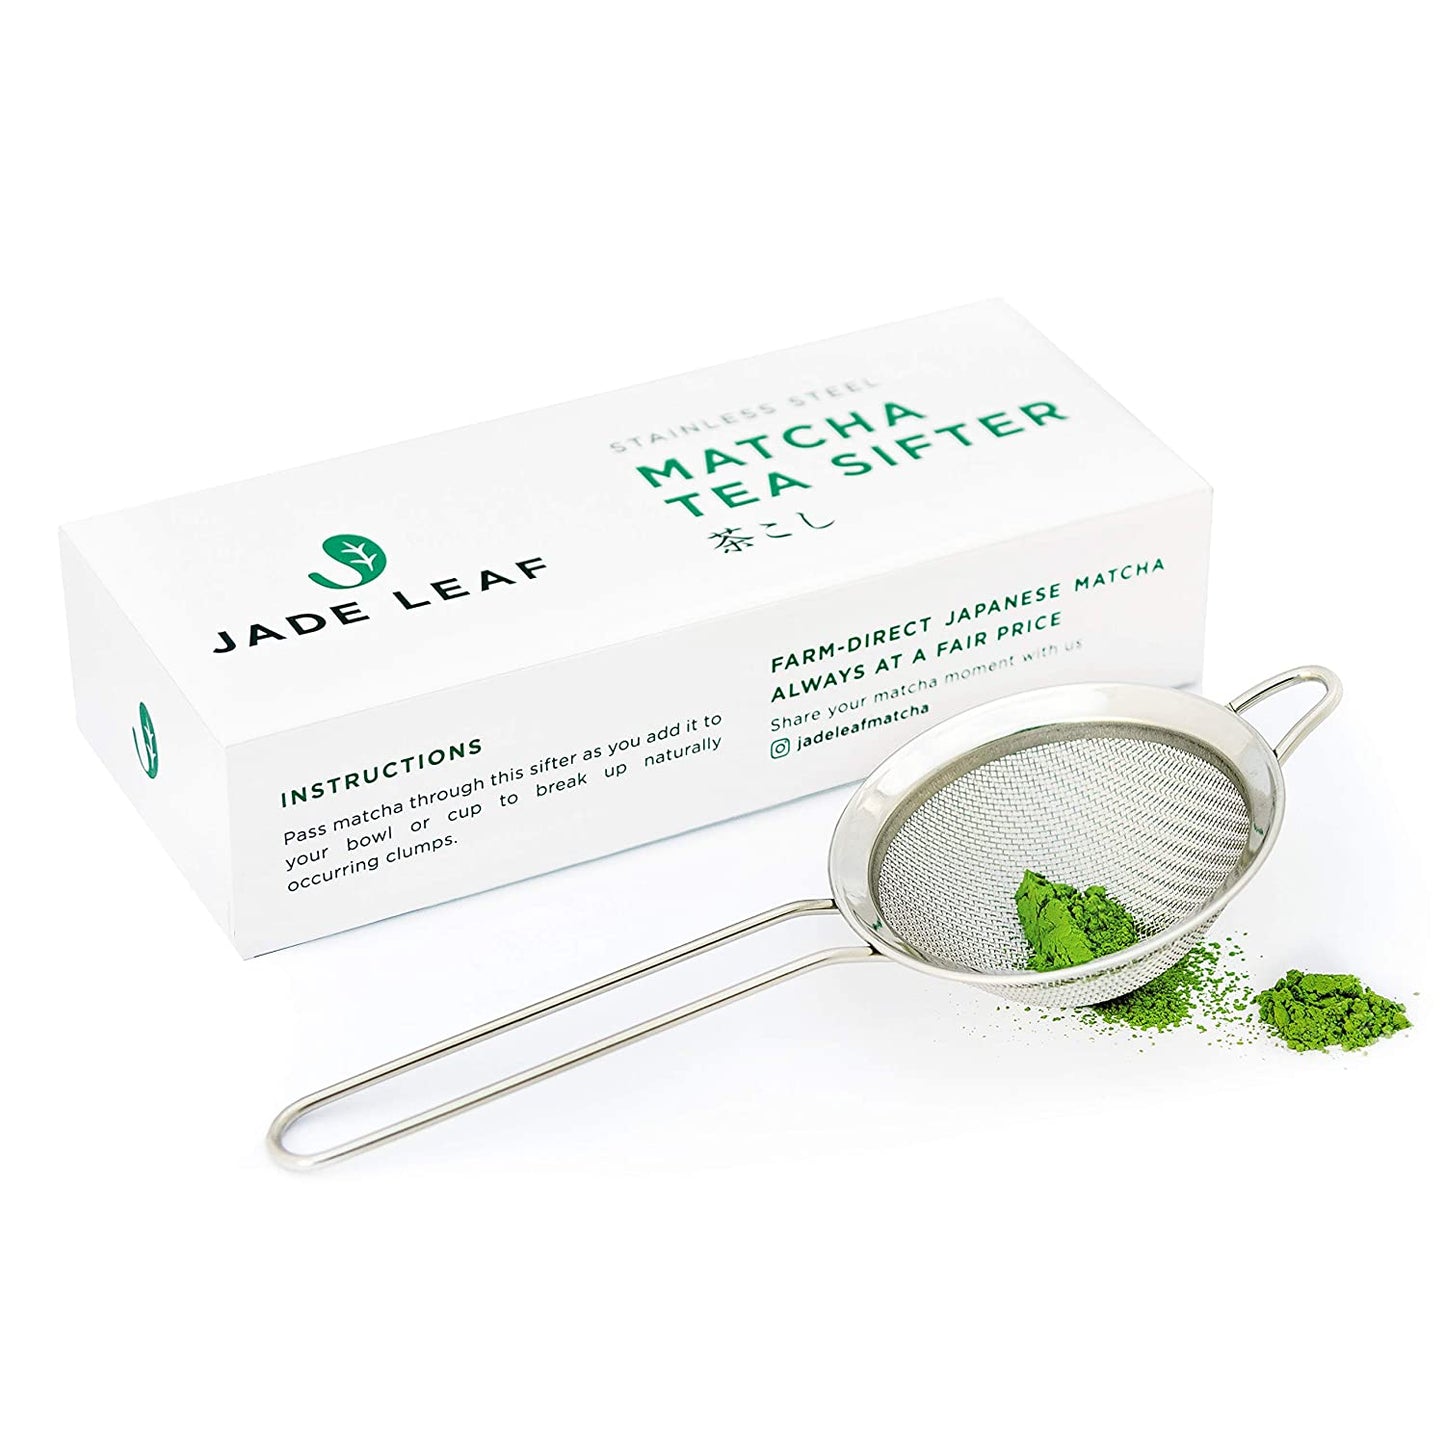 Jade Leaf - Complete Matcha Ceremony Set - Bamboo Matcha Whisk and Scoop, Stainless Steel Sifter, Stoneware Bowl & Whisk Holder, Prep Guide